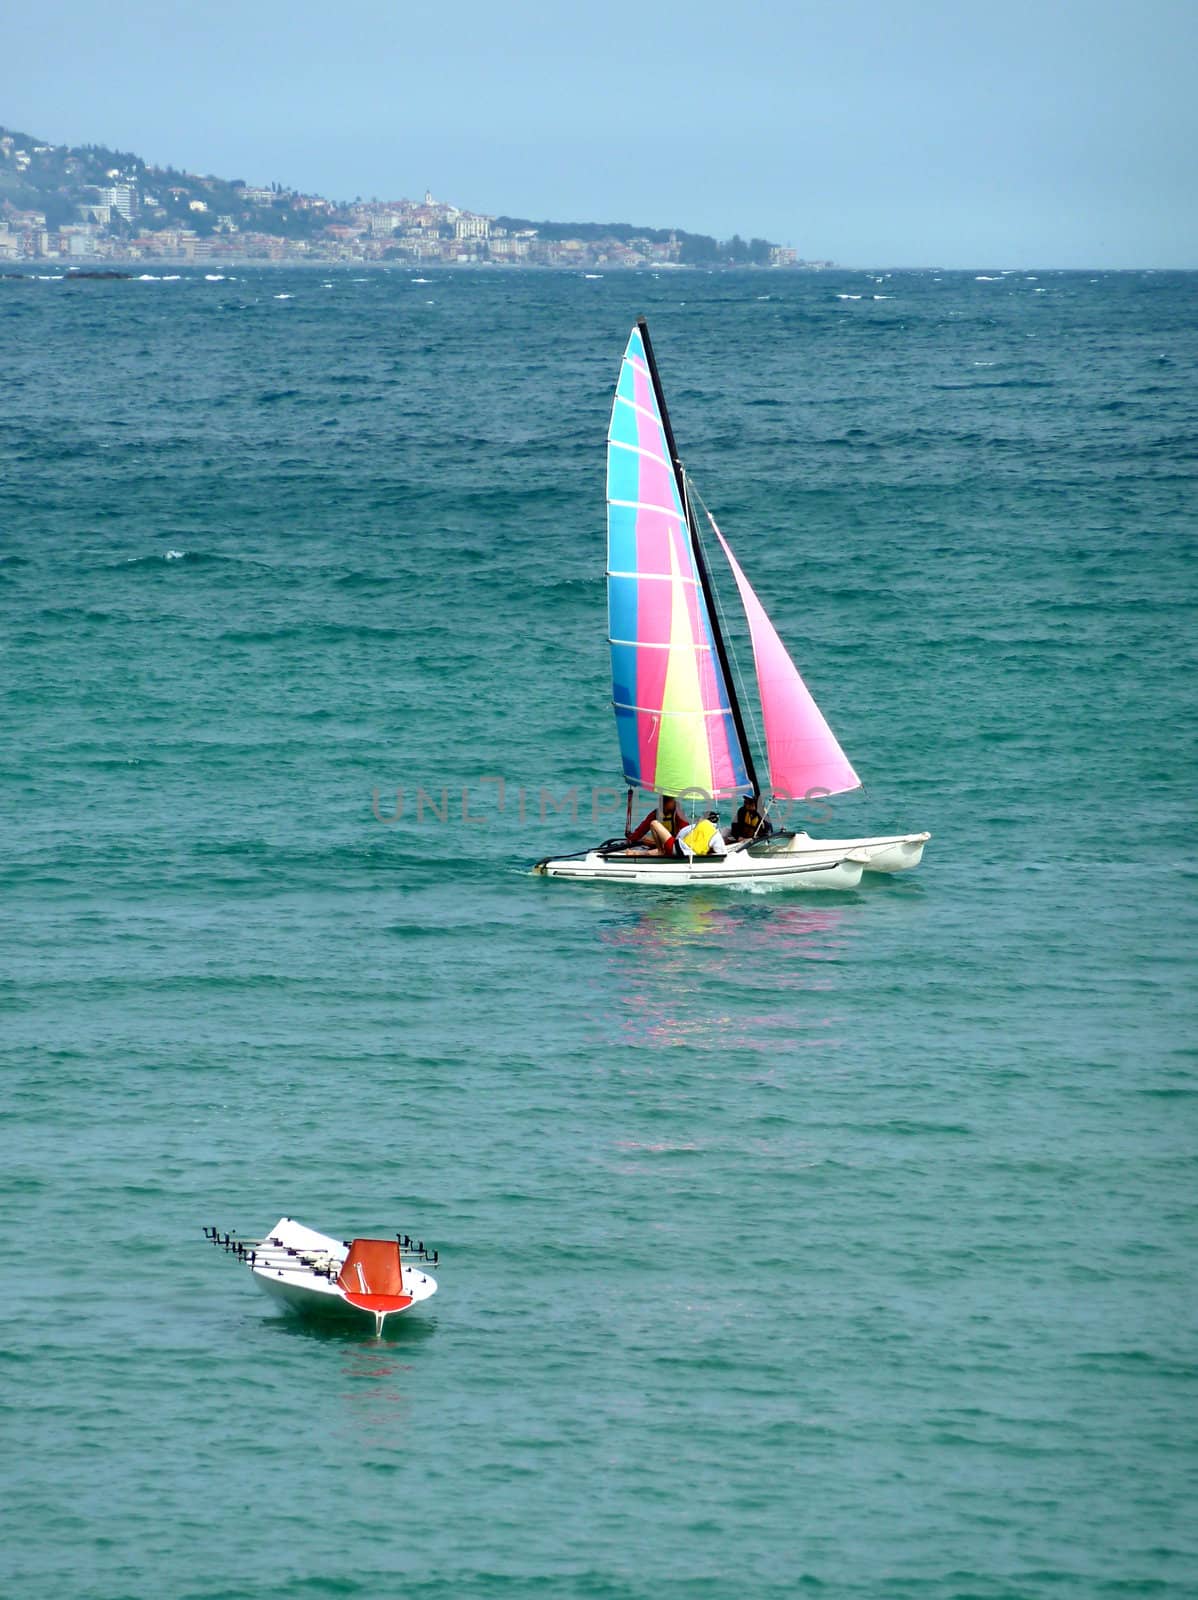 Very colored sailing boat by Elenaphotos21